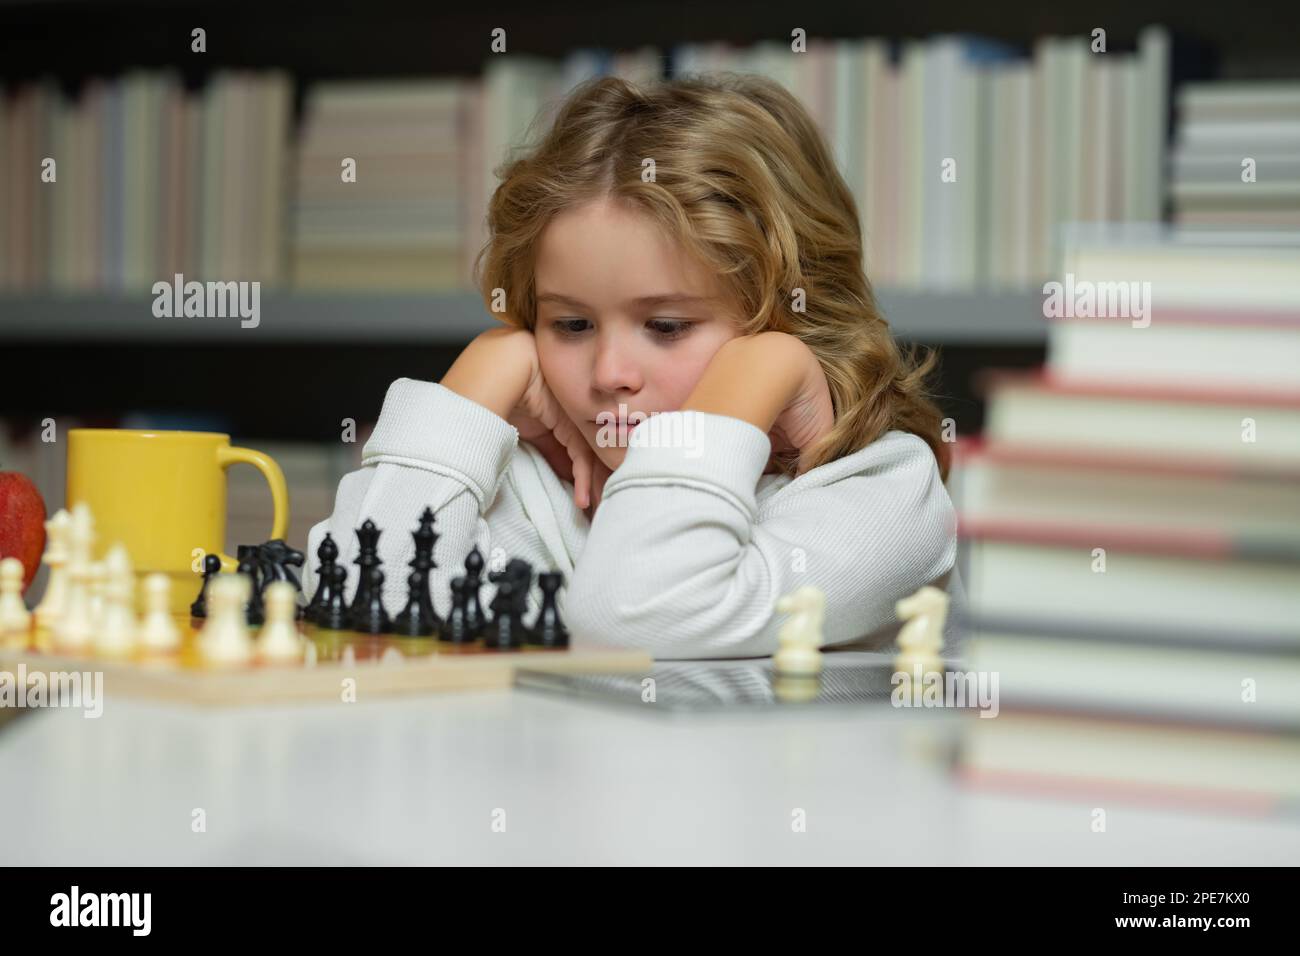 Early development. Boy thinking about chess. The concept of learning and growing children. Chess, success and winning Stock Photo